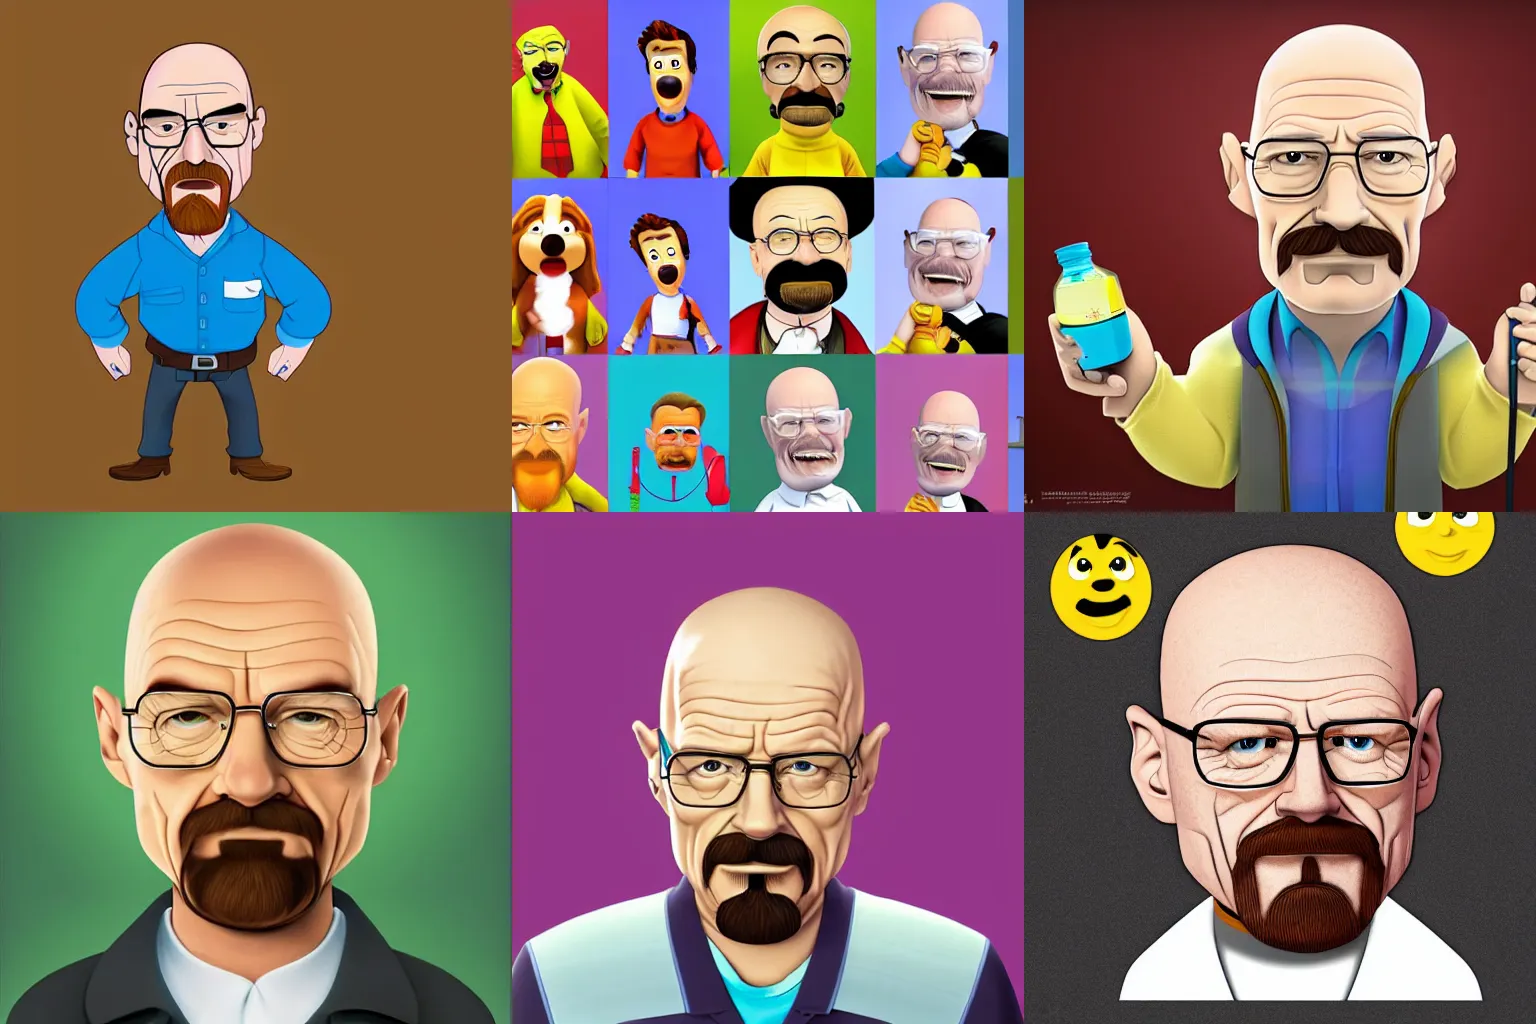 Prompt: walter white as a disney chemist character in pixar style. highly detailed digital character art.